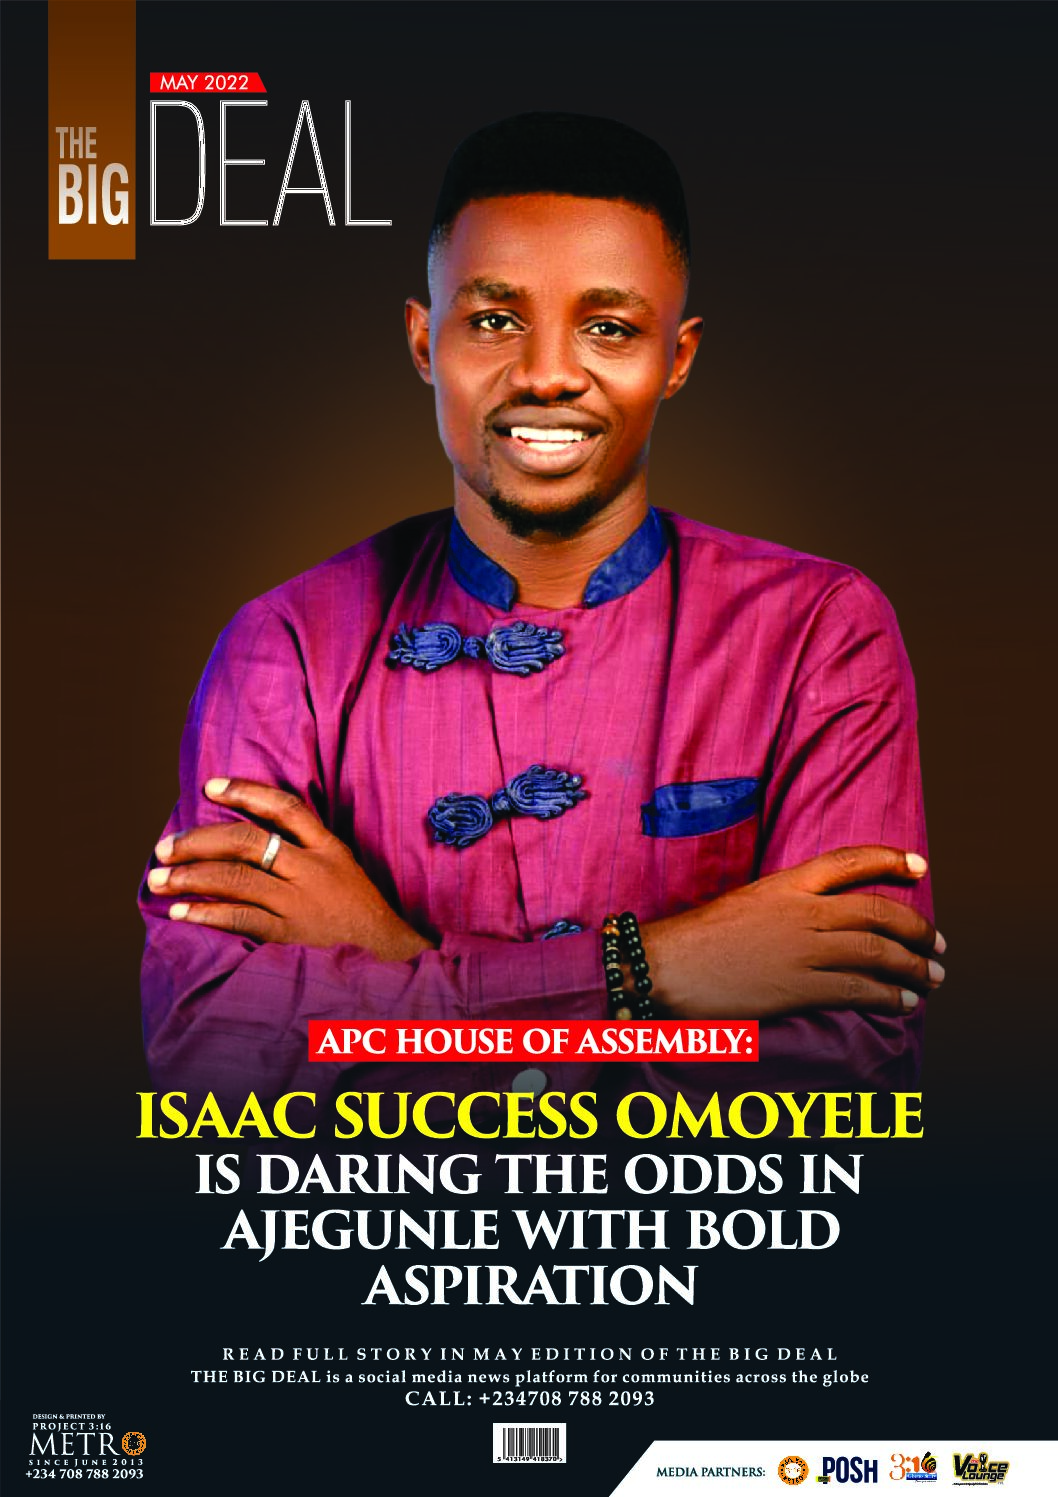 APC HOUSE OF ASSEMBLY: ISAAC SUCCESS OMOYELE IS DARING THE ODDS IN AJEGUNLE WITH BOLD ASPIRATION